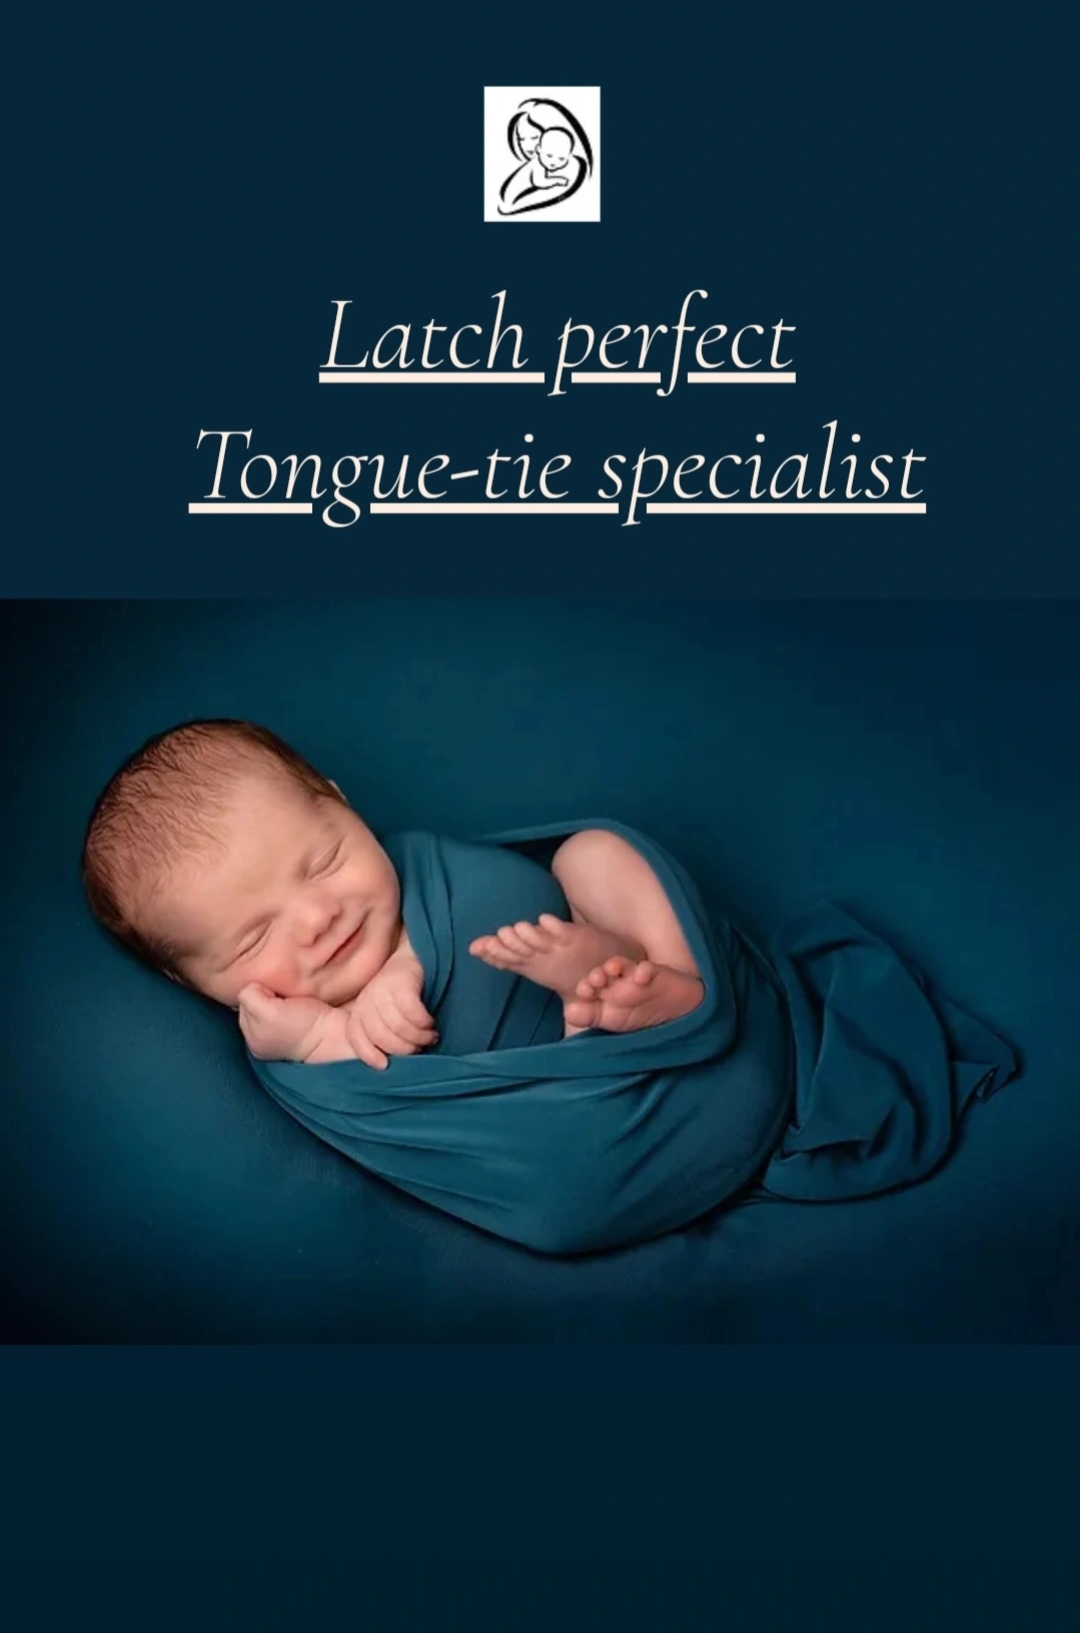 Latchperfect Tongue-tie Specialist 's logo